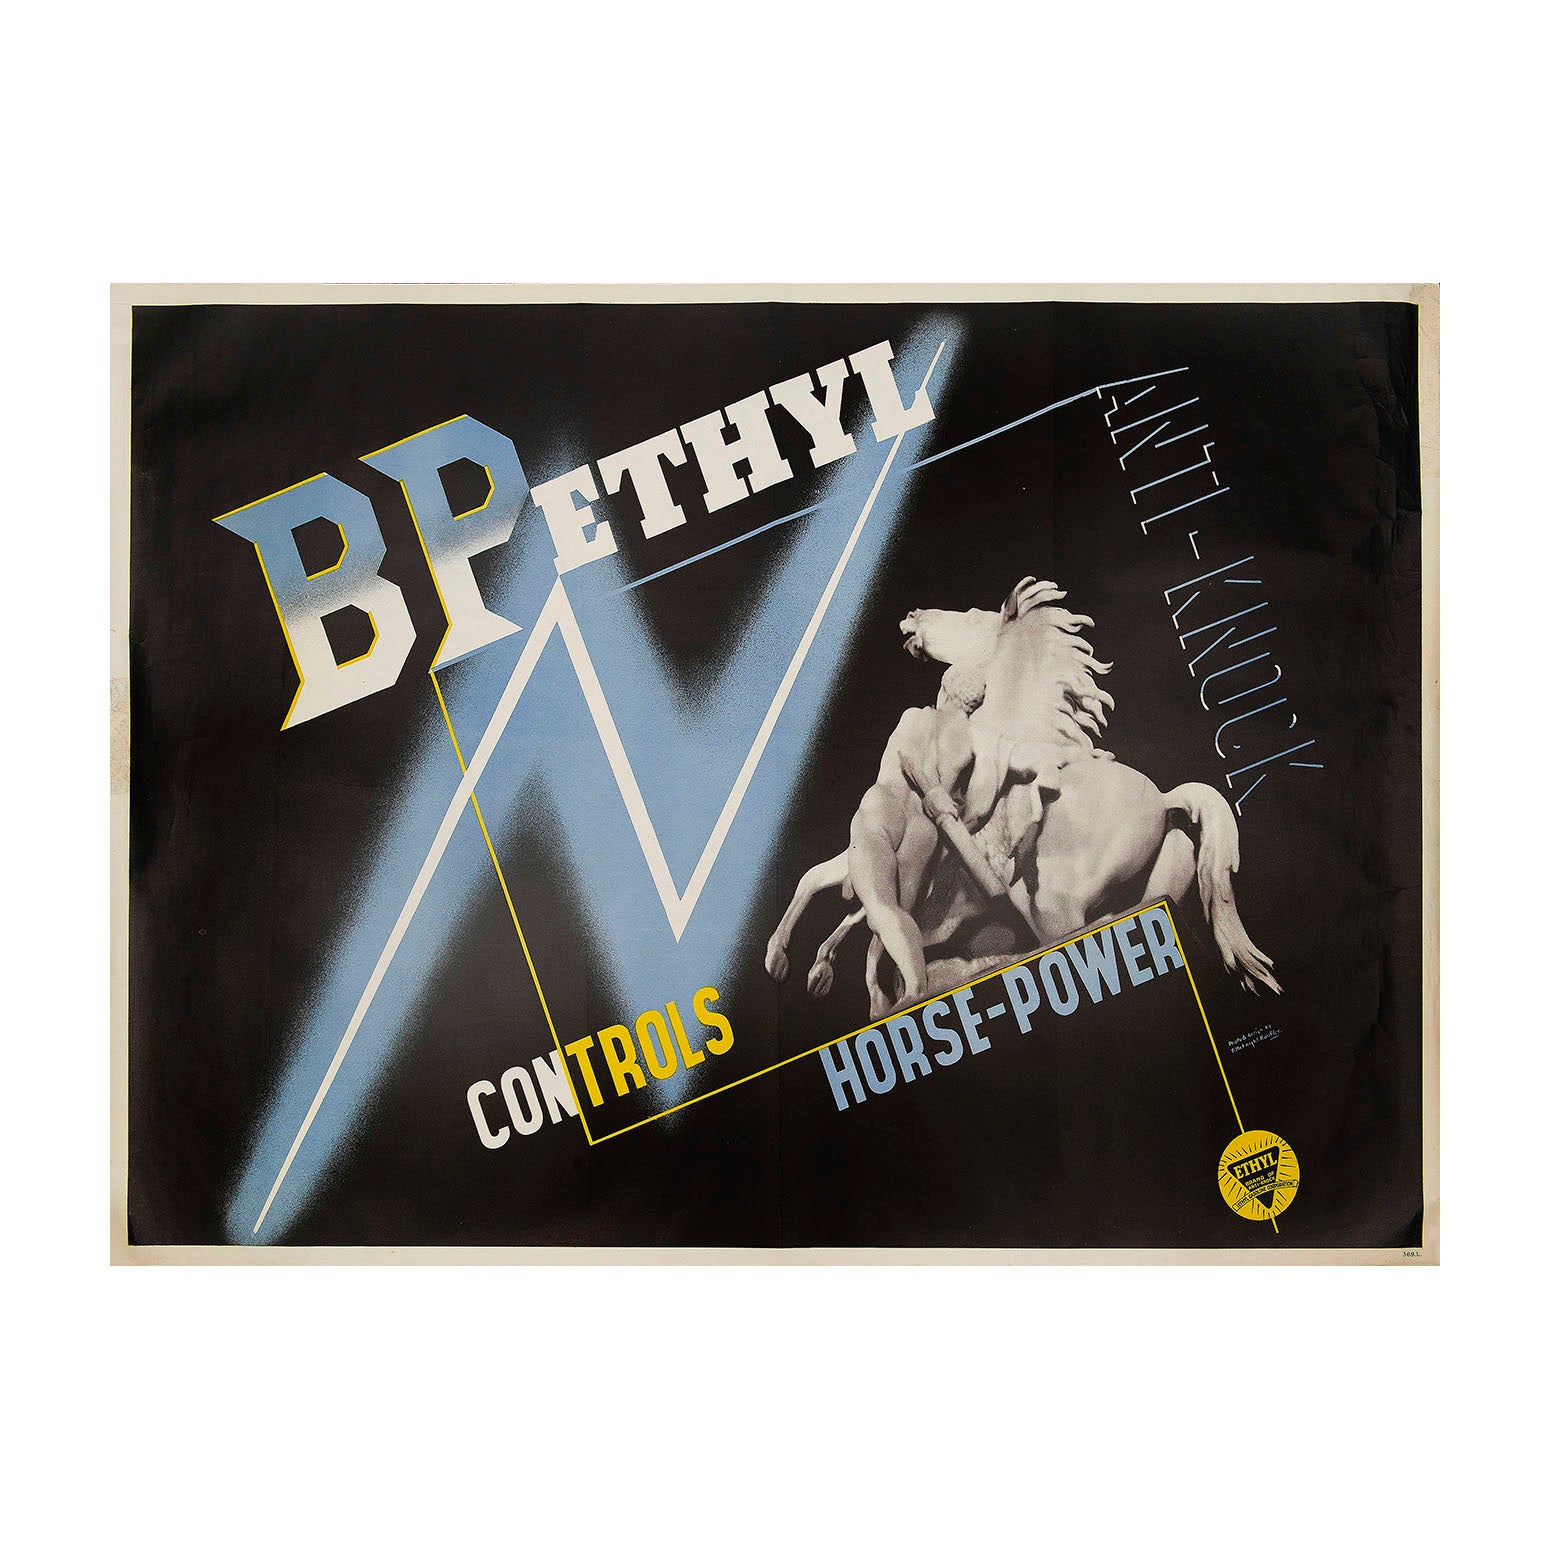 Original antique poster: BP Ethyl Controls Horse-Power, Edward McKnight Kauffer, 1933. photomontage a night-time photograph of the Horse Tamers in the Place de la Concorde. dramatic asymmetrical lettering 